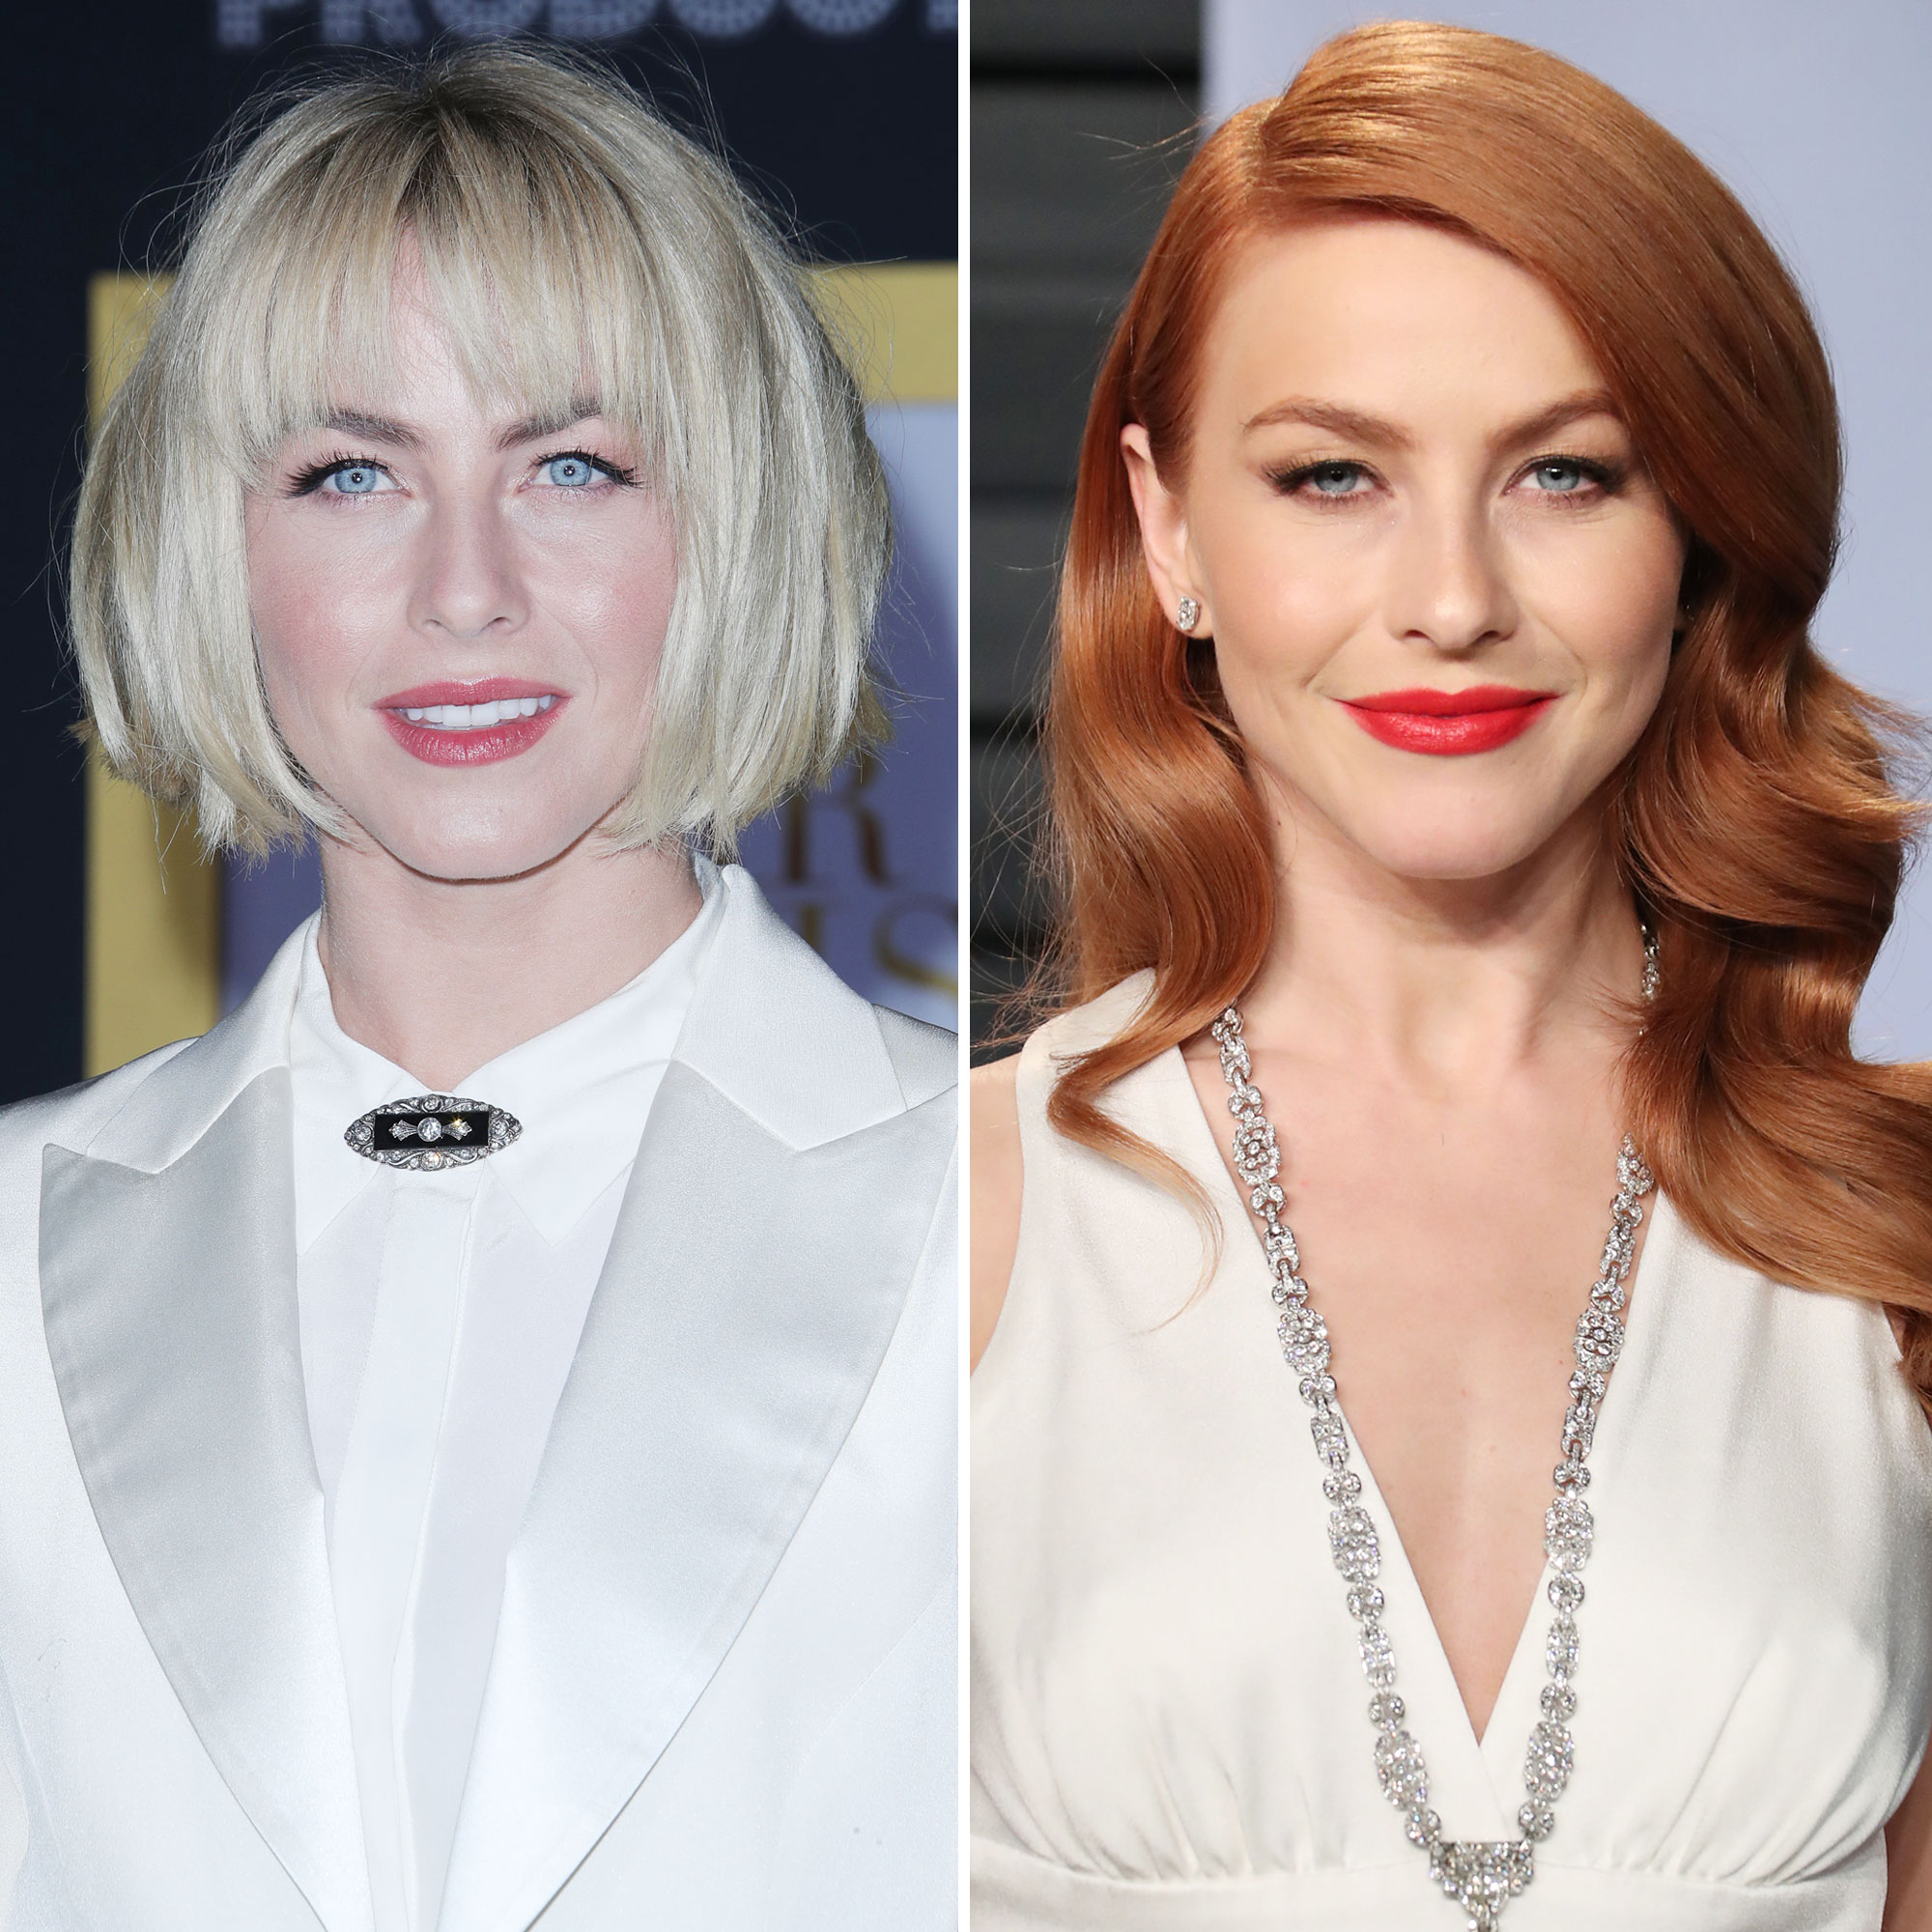 Photos of Celebrities After Drastic Hair Transformations